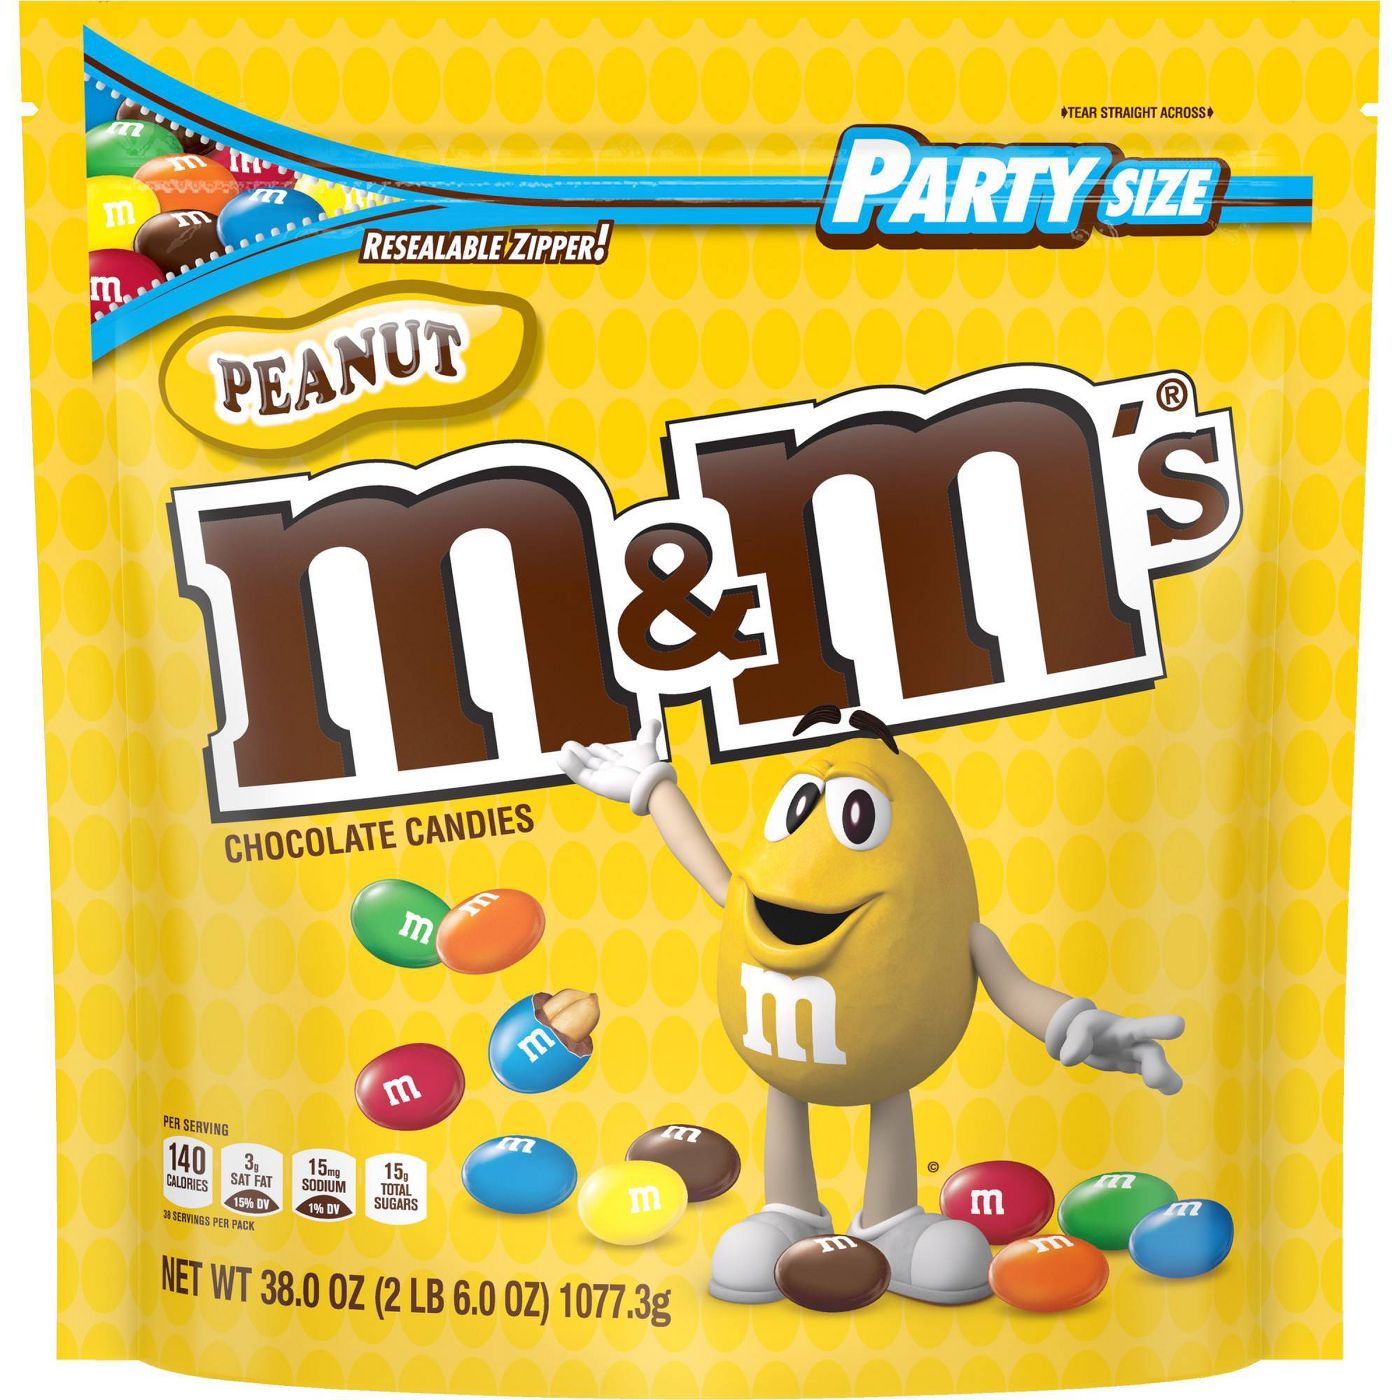  M&M's Party Size Candy Bag, Caramel Chocolate, 38